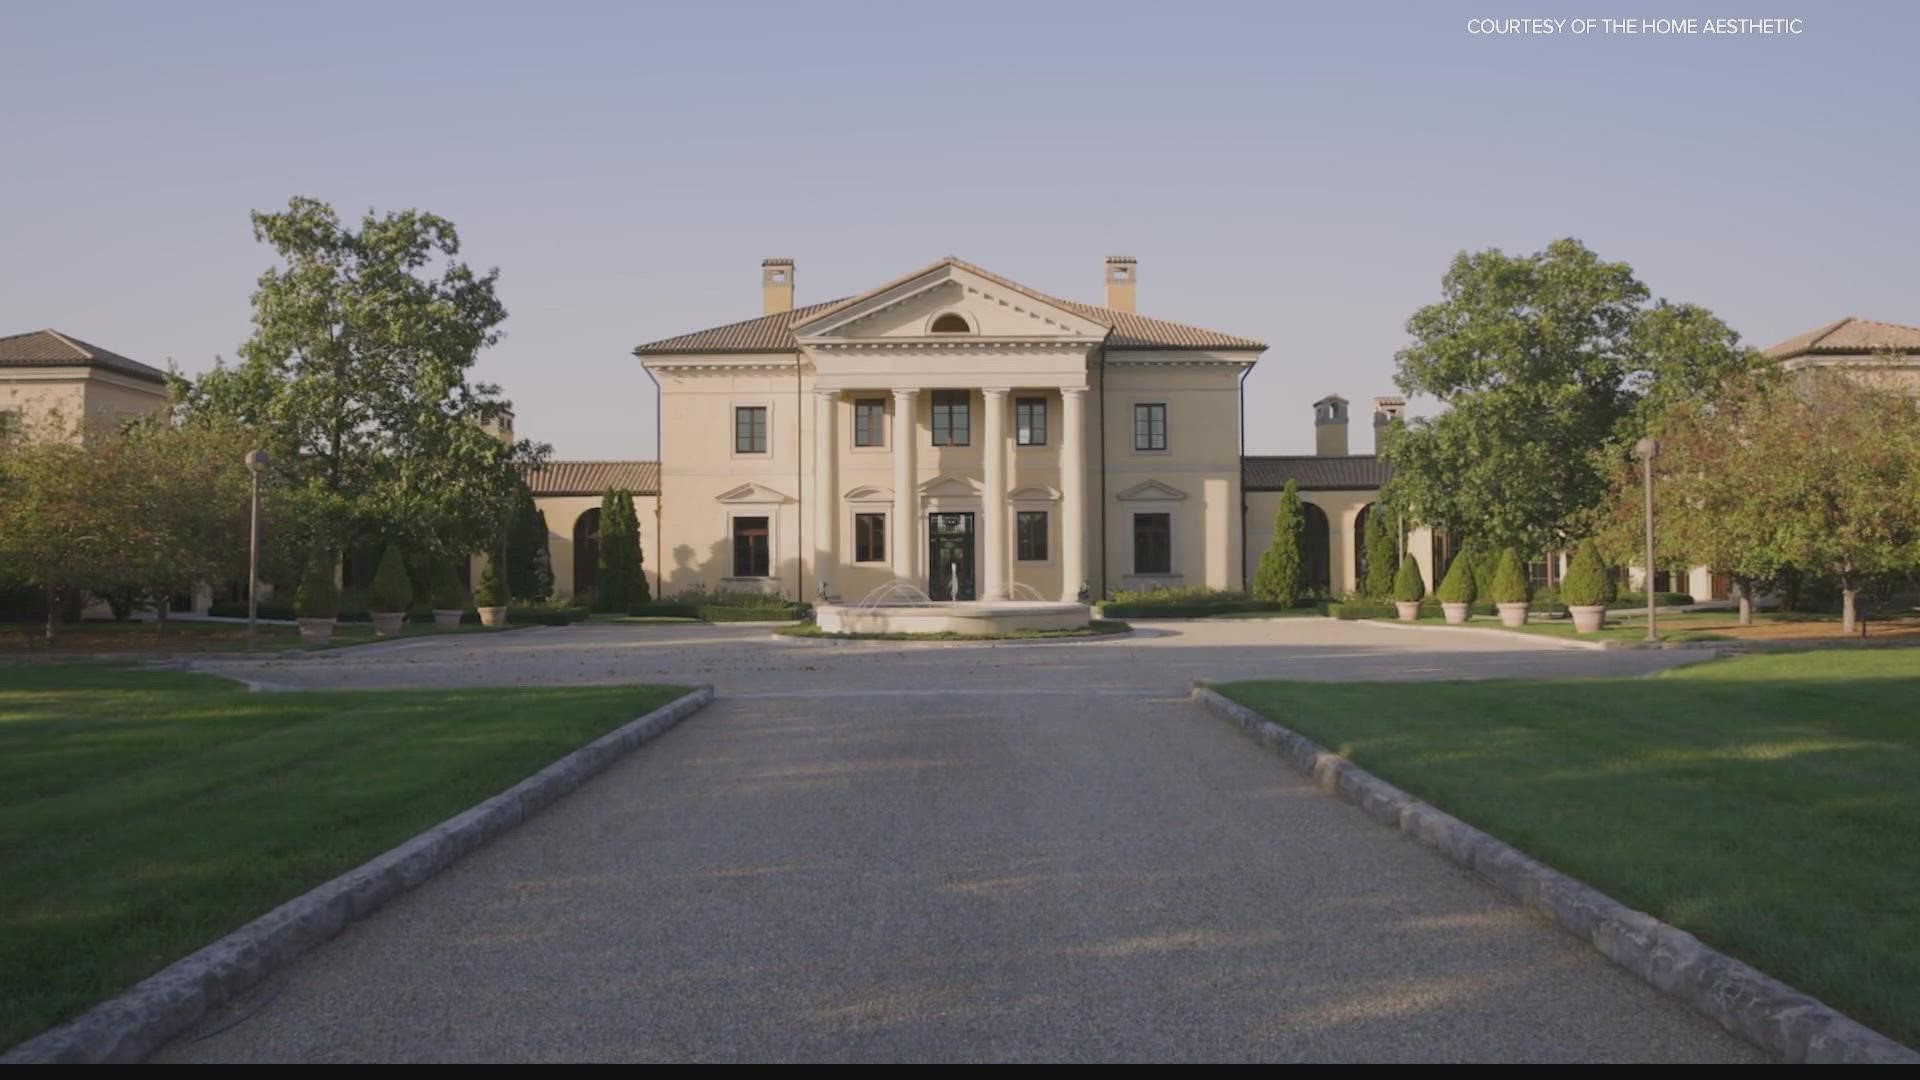 We're getting a look inside the mansion that once belonged to Indianapolis philanthropist Christel DeHaan.